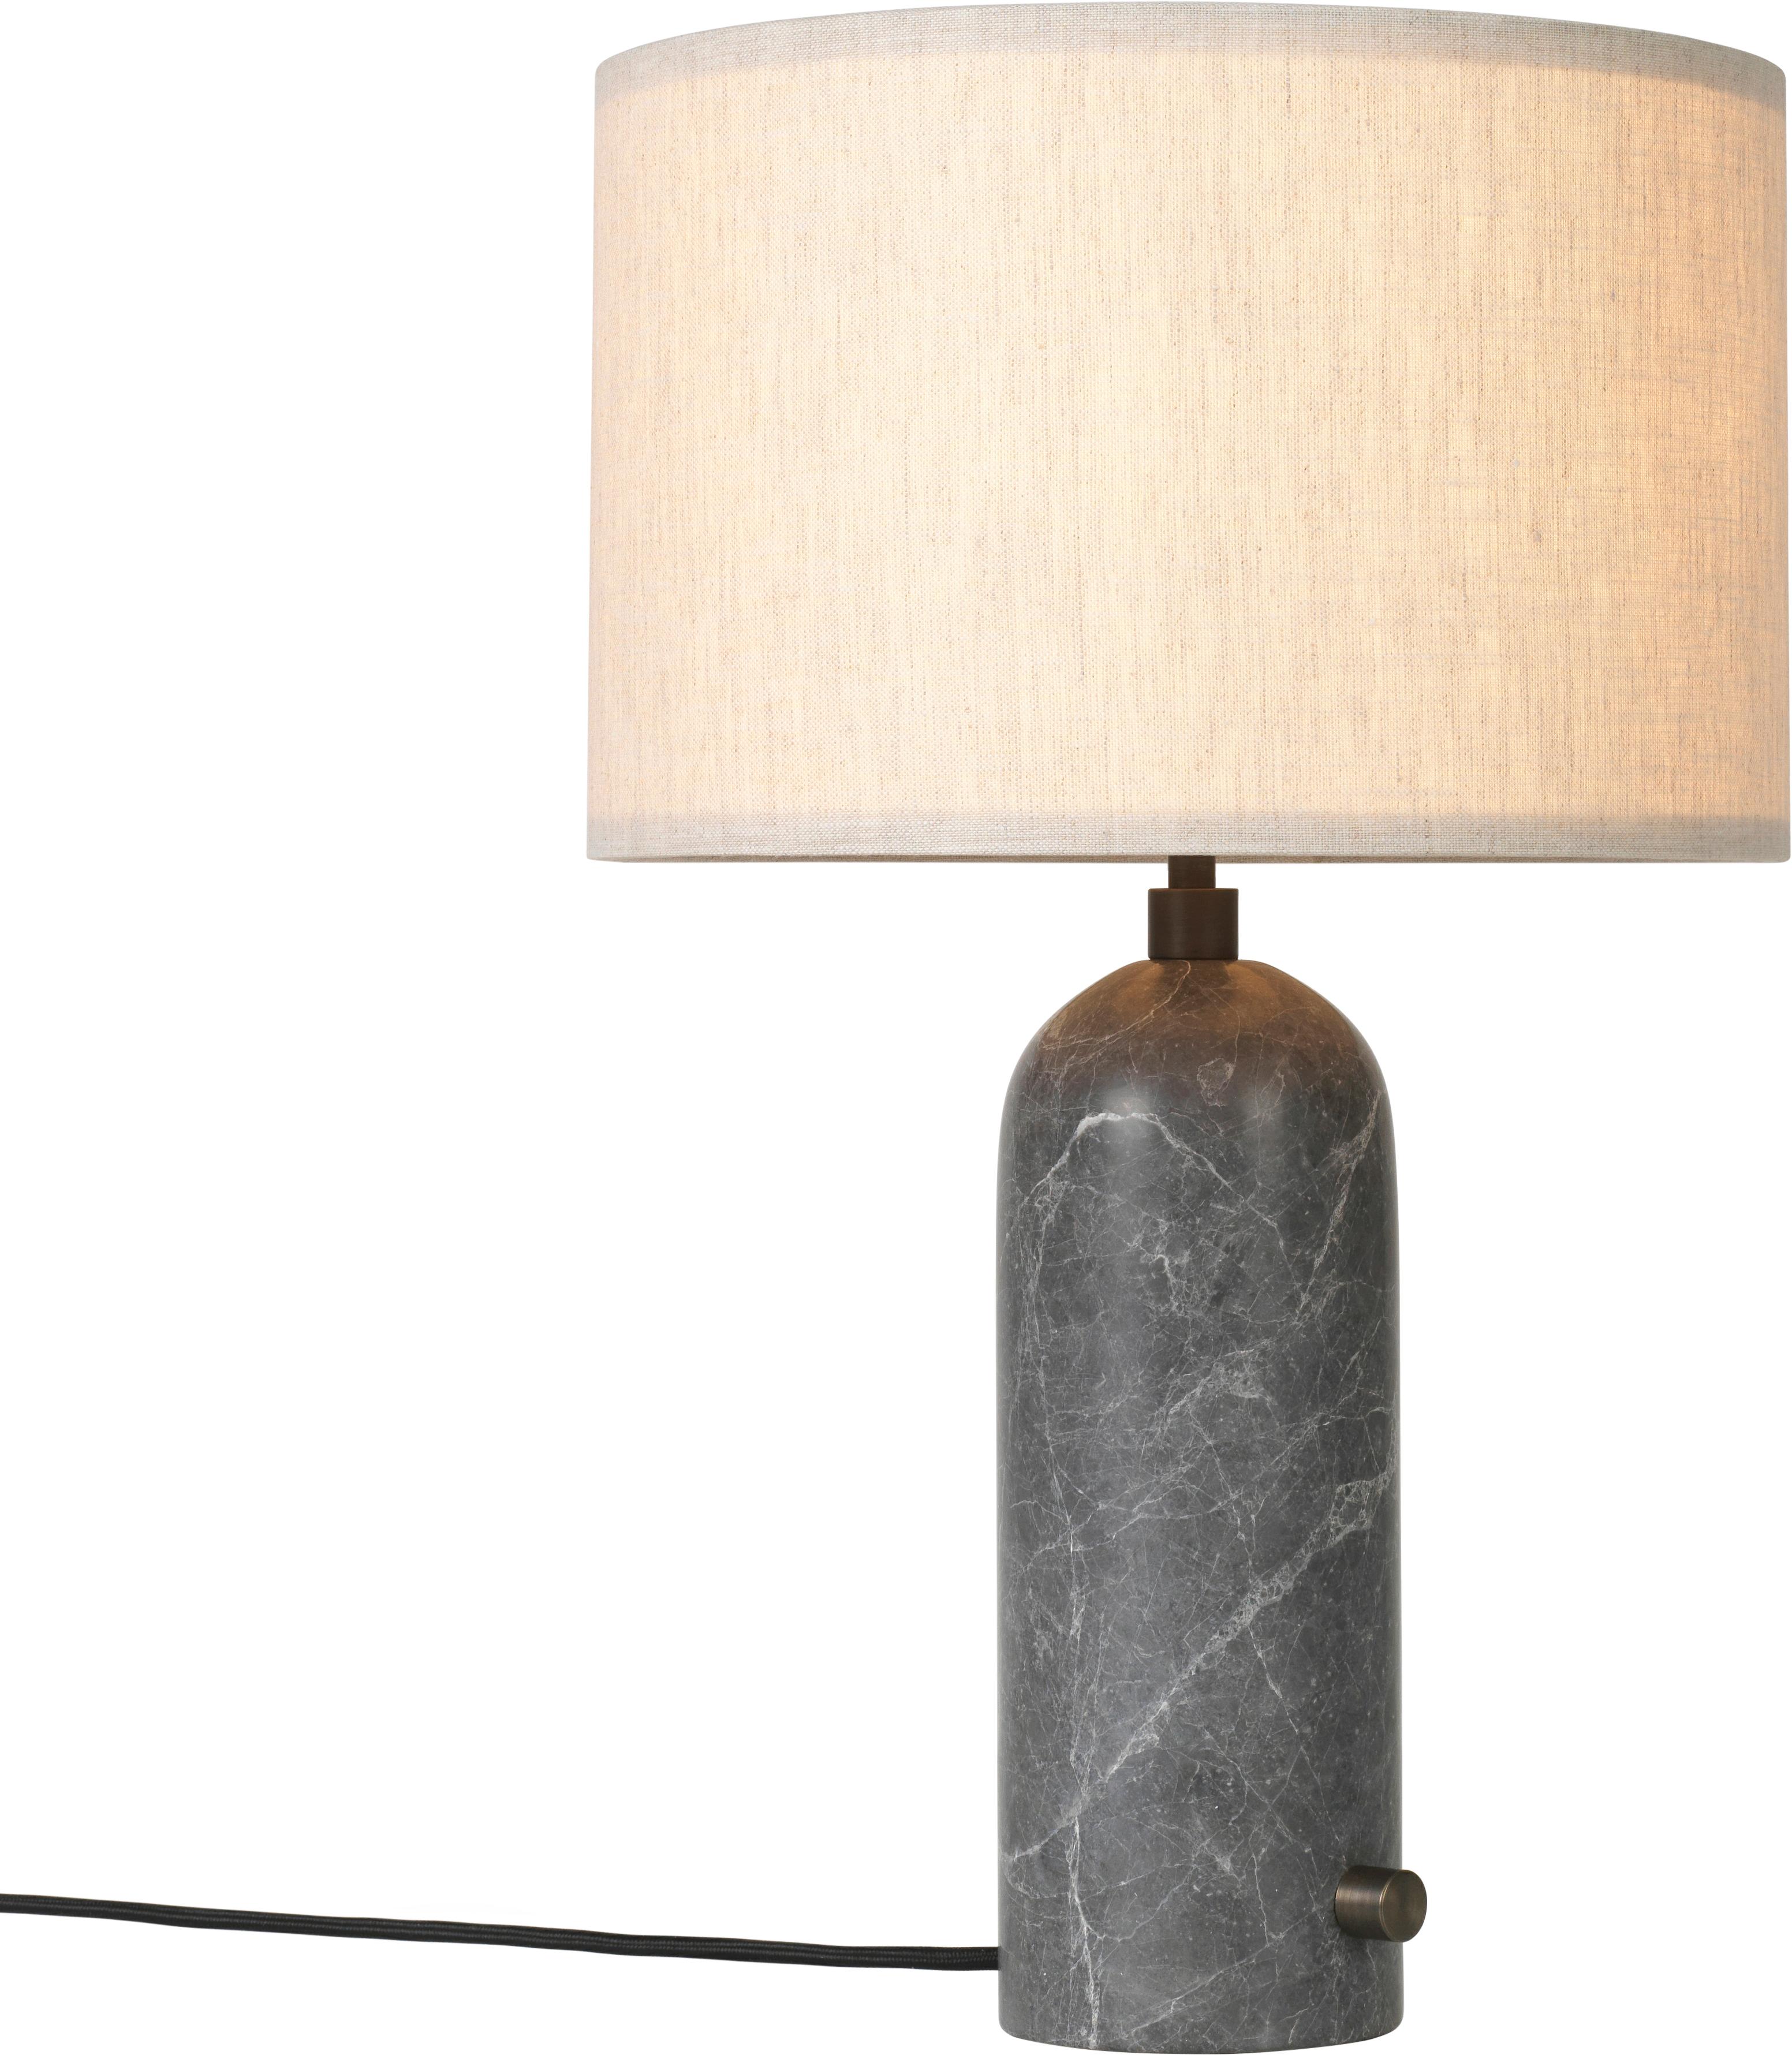 Large 'Gravity' Blackened Steel Table Lamp by Space Copenhagen for Gubi For Sale 6